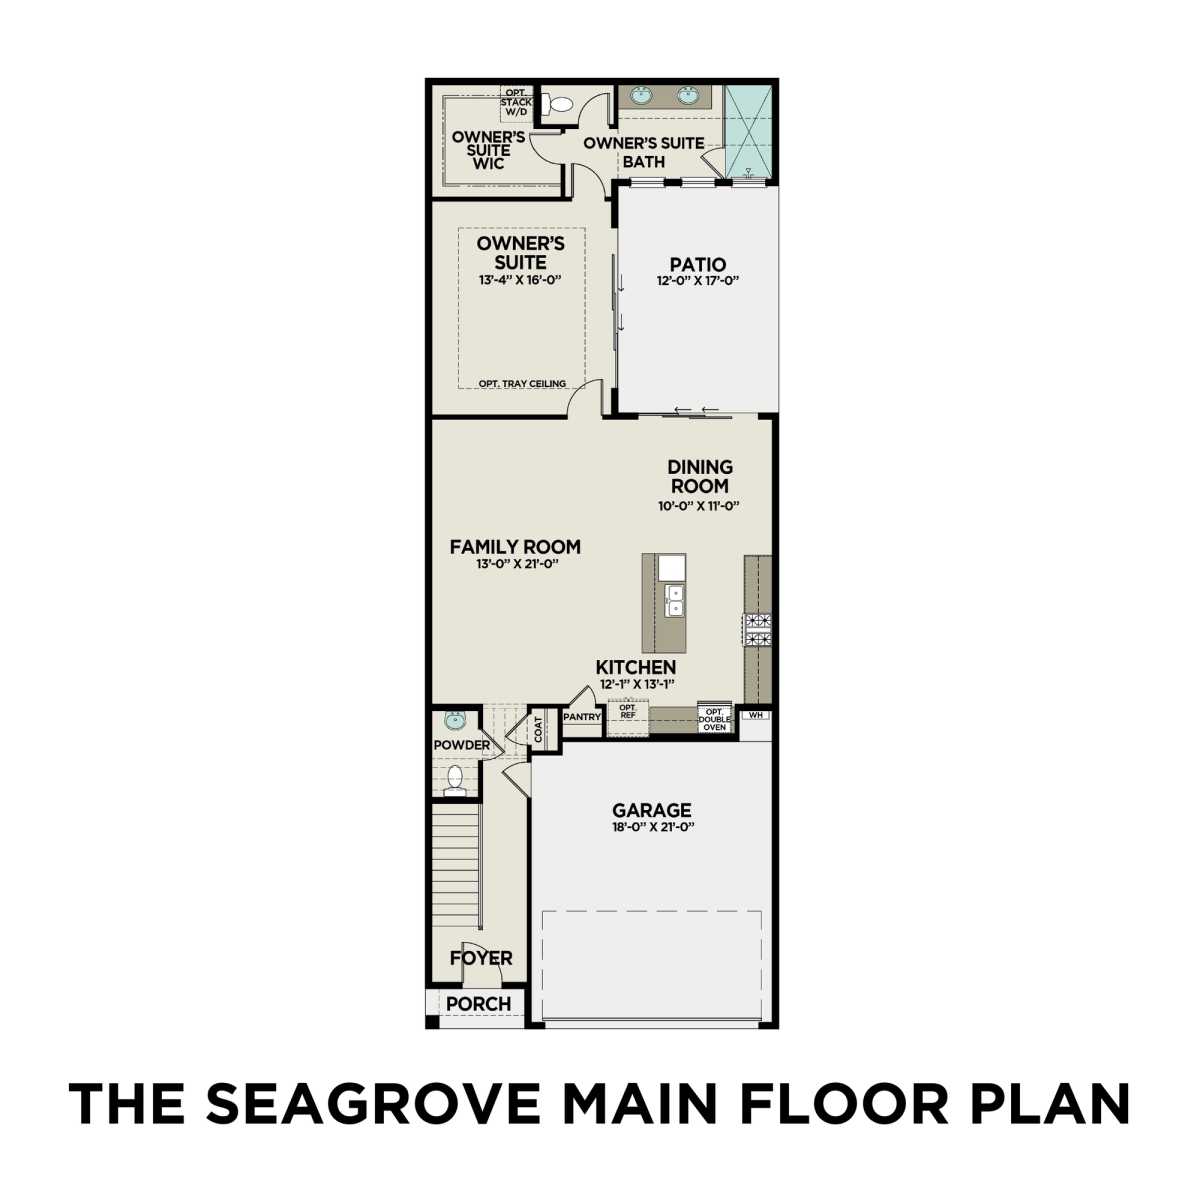 1 - The Seagrove A floor plan layout for 754 Stickley Oak Way in Davidson Homes' The Village at Towne Lake community.